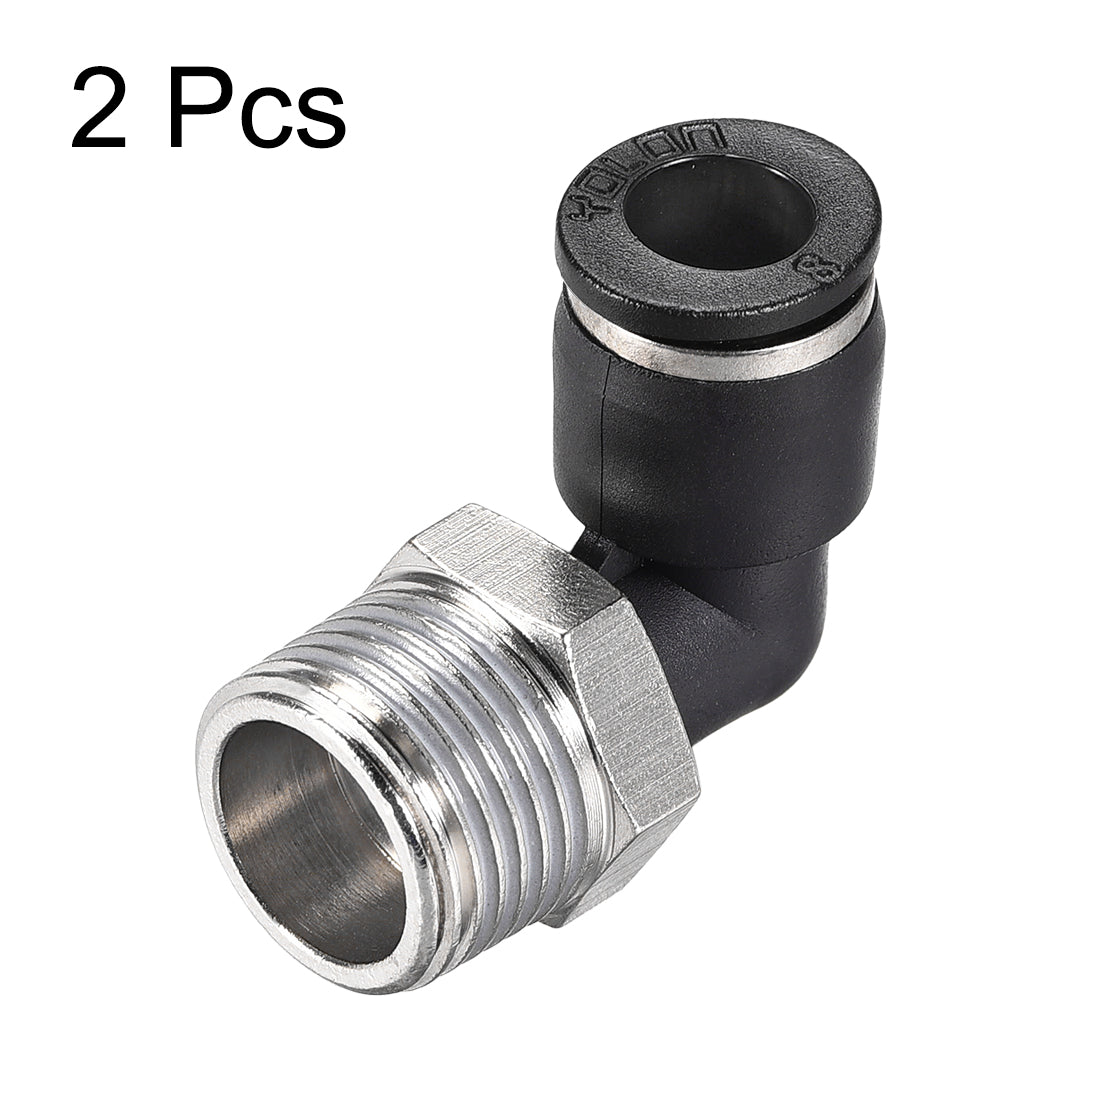 uxcell Uxcell Push to Connect Tube Fitting Male Elbow 8mm Tube OD x 3/8 NPT Thread Pneumatic Air Push Fit Lock Fitting 2pcs